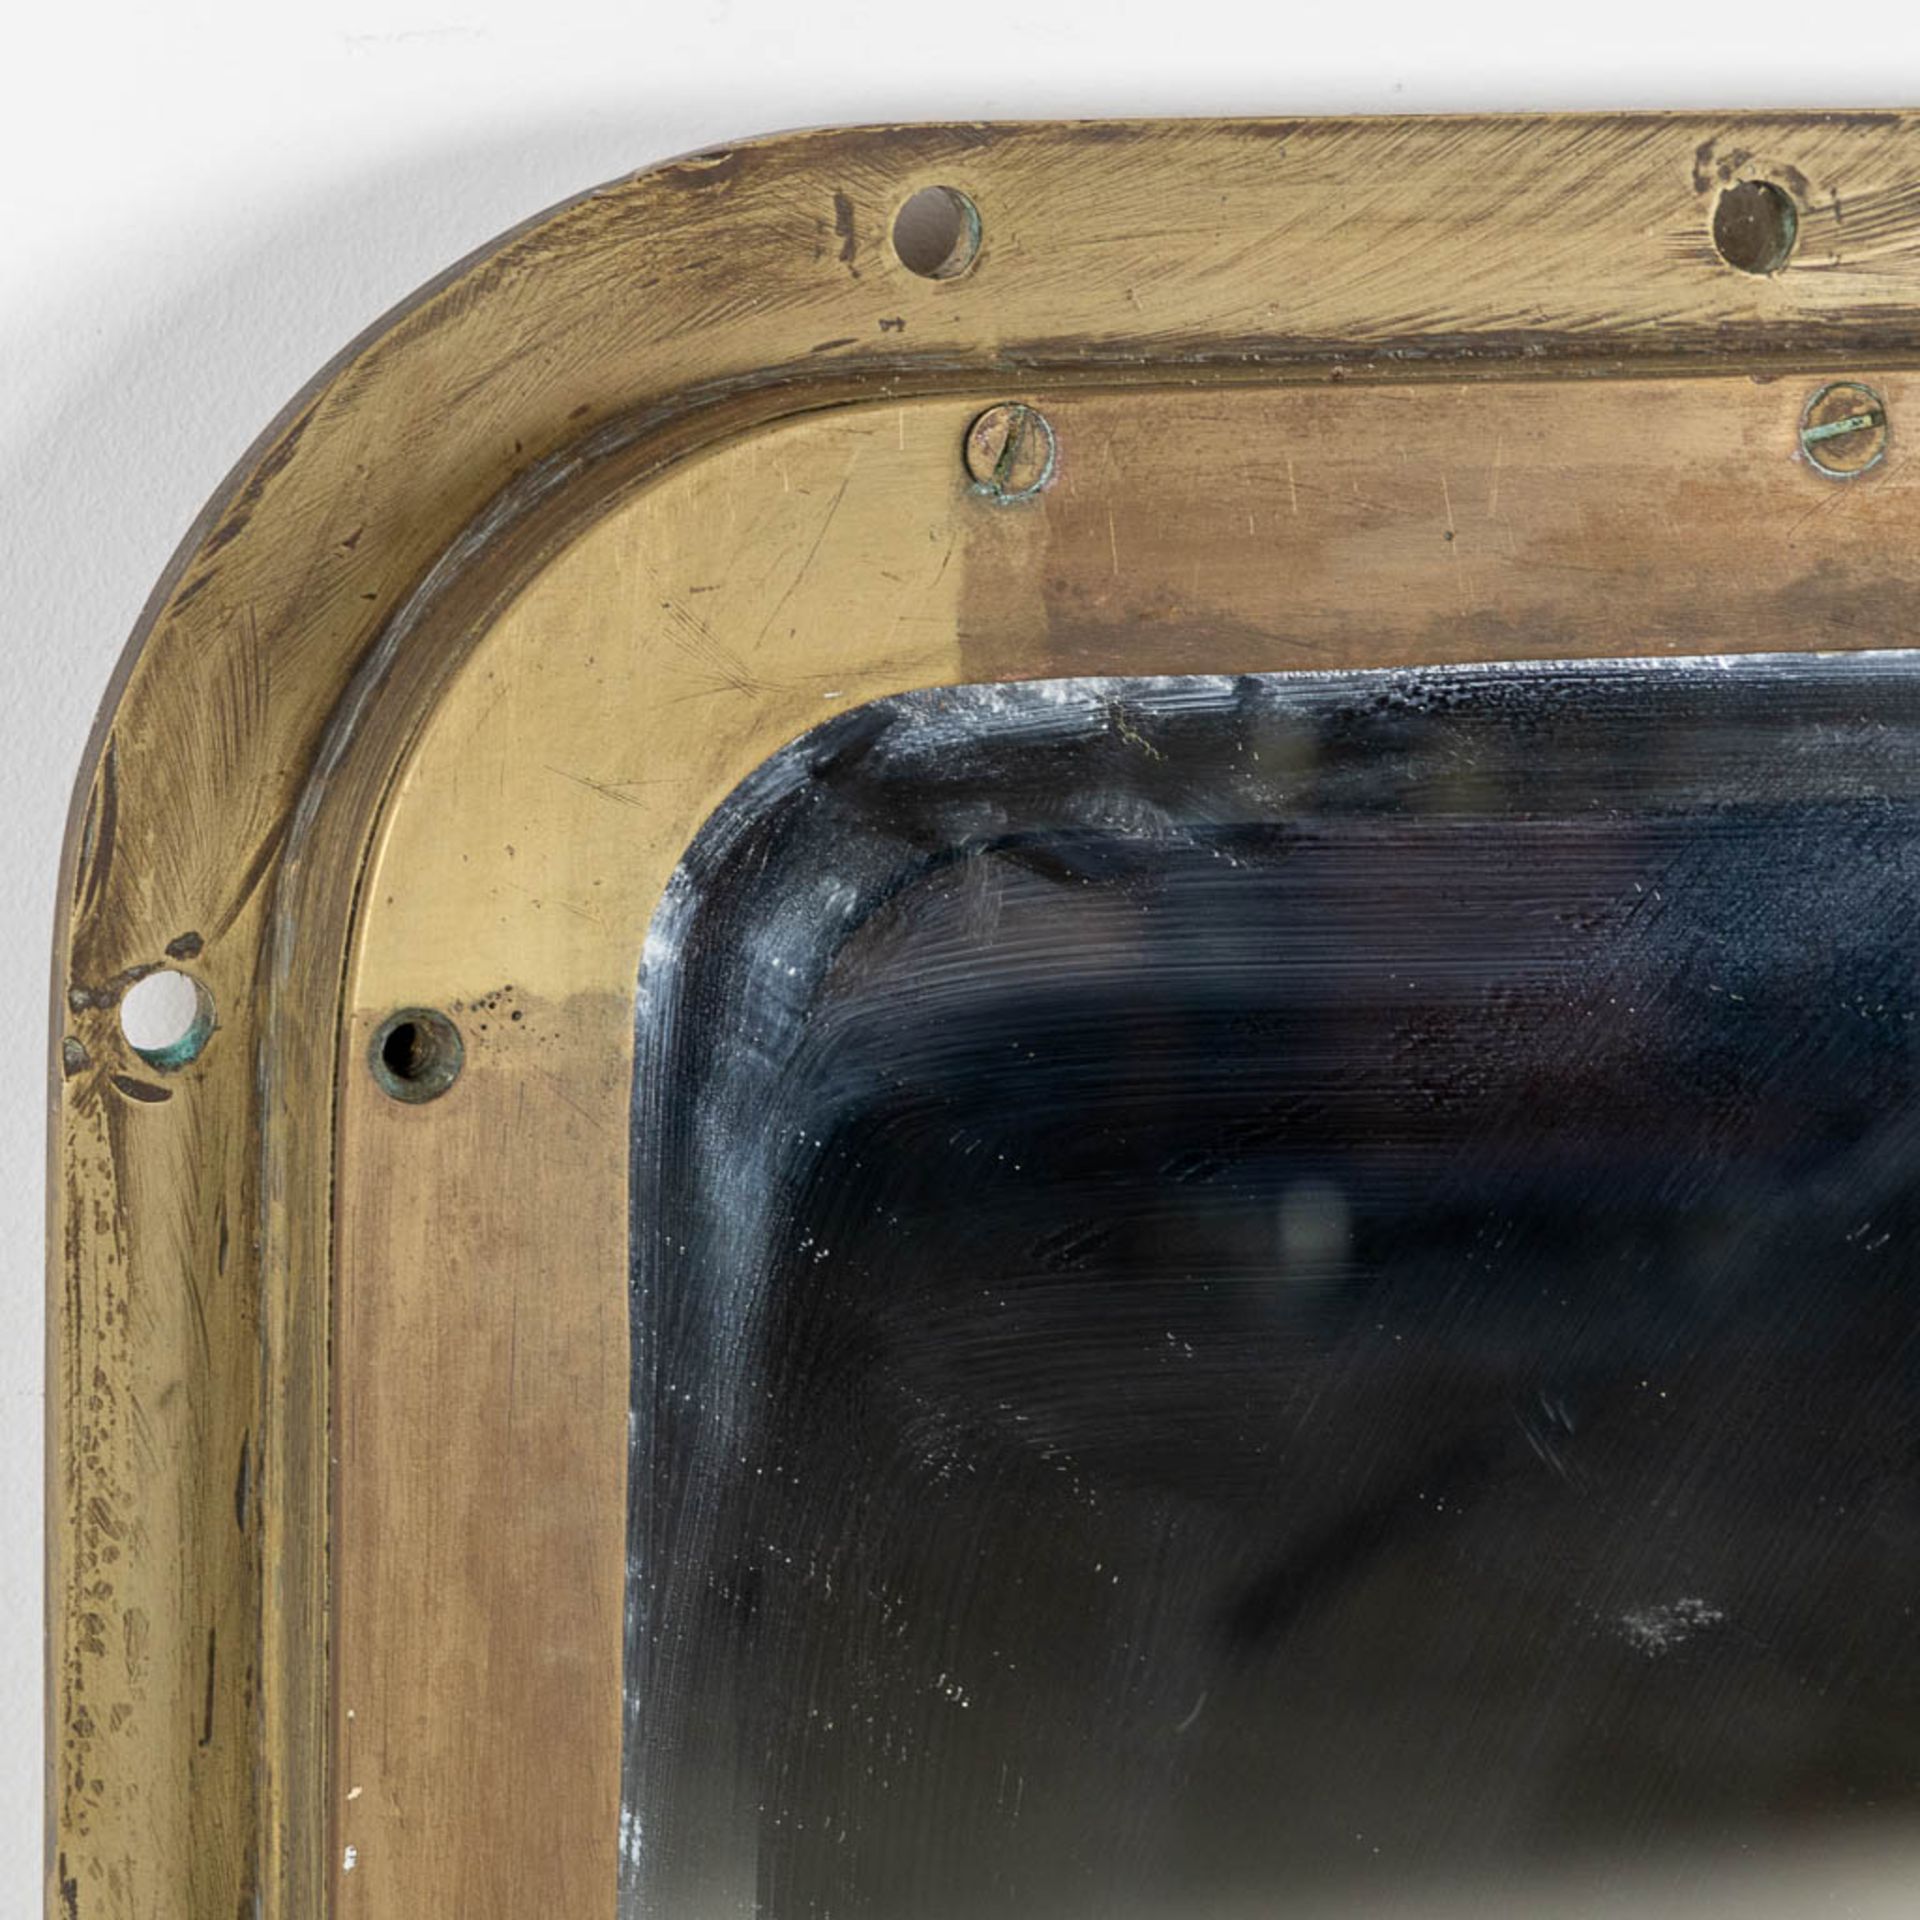 Three various Portholes, bronze and glass. Two changed into a mirror. (W:86 x H:110 cm) - Image 4 of 7